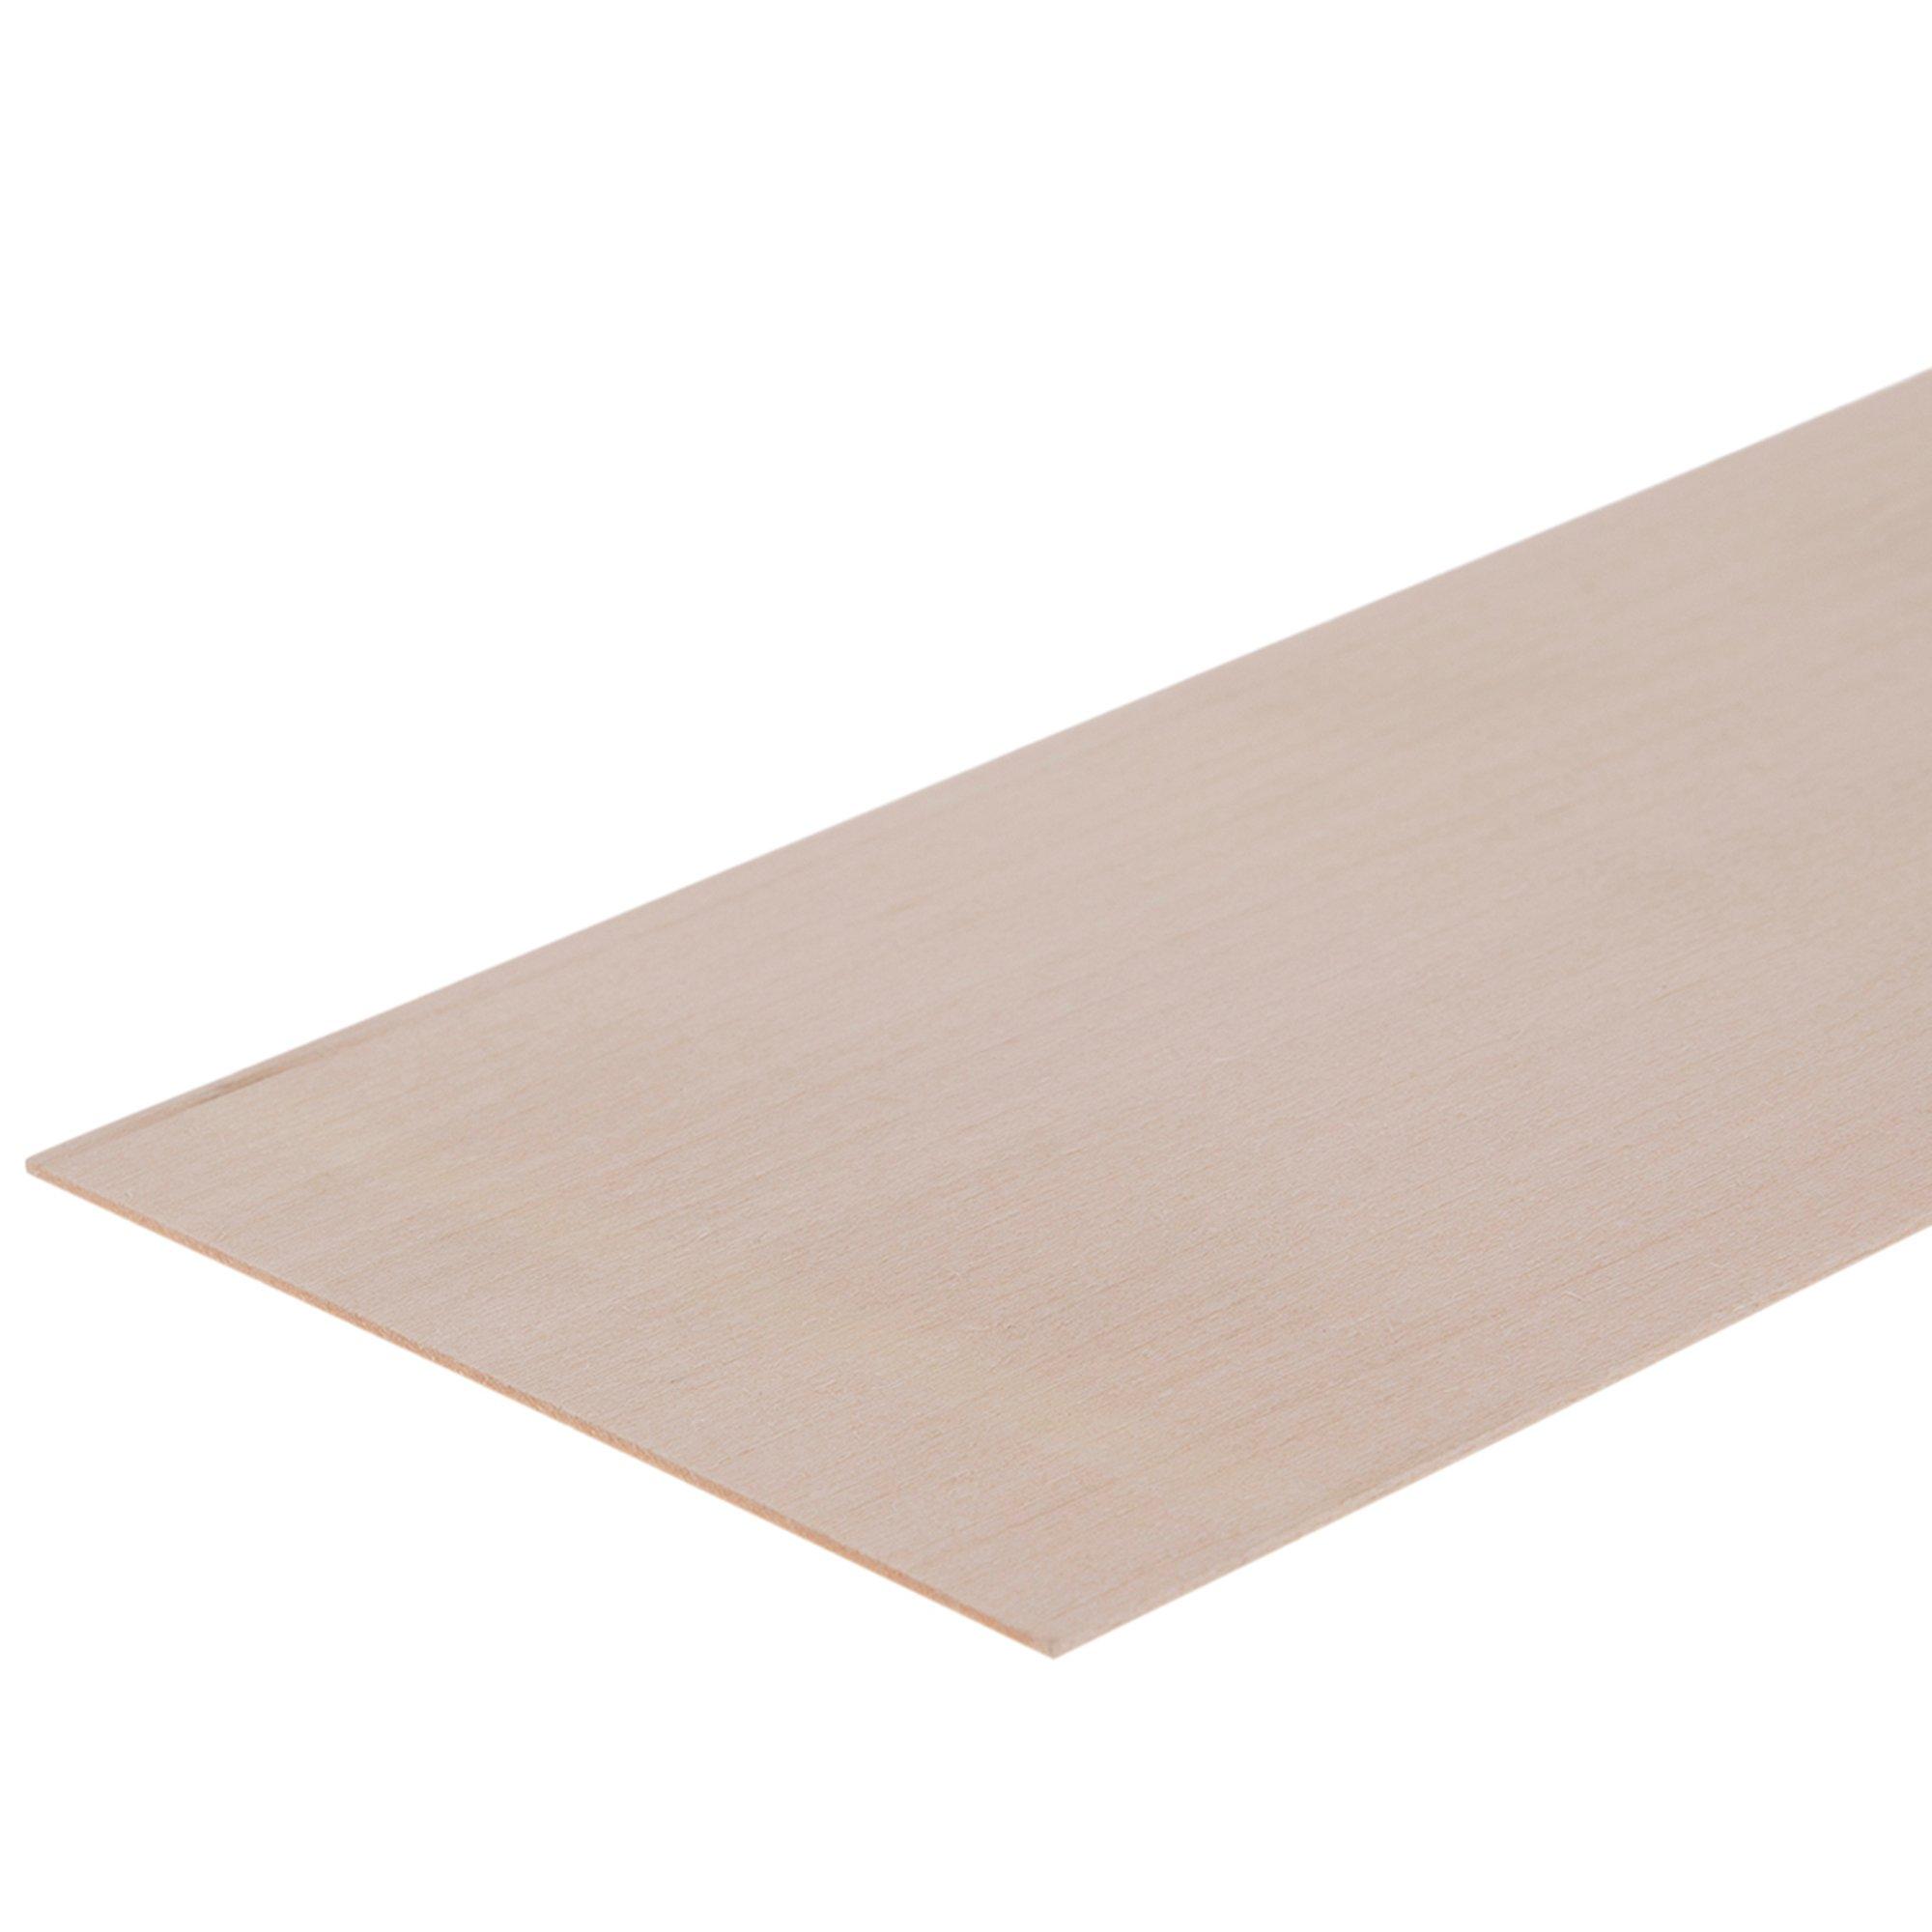 Basswood Sheet 3/8in x 3in x 24in (Pack of 5)